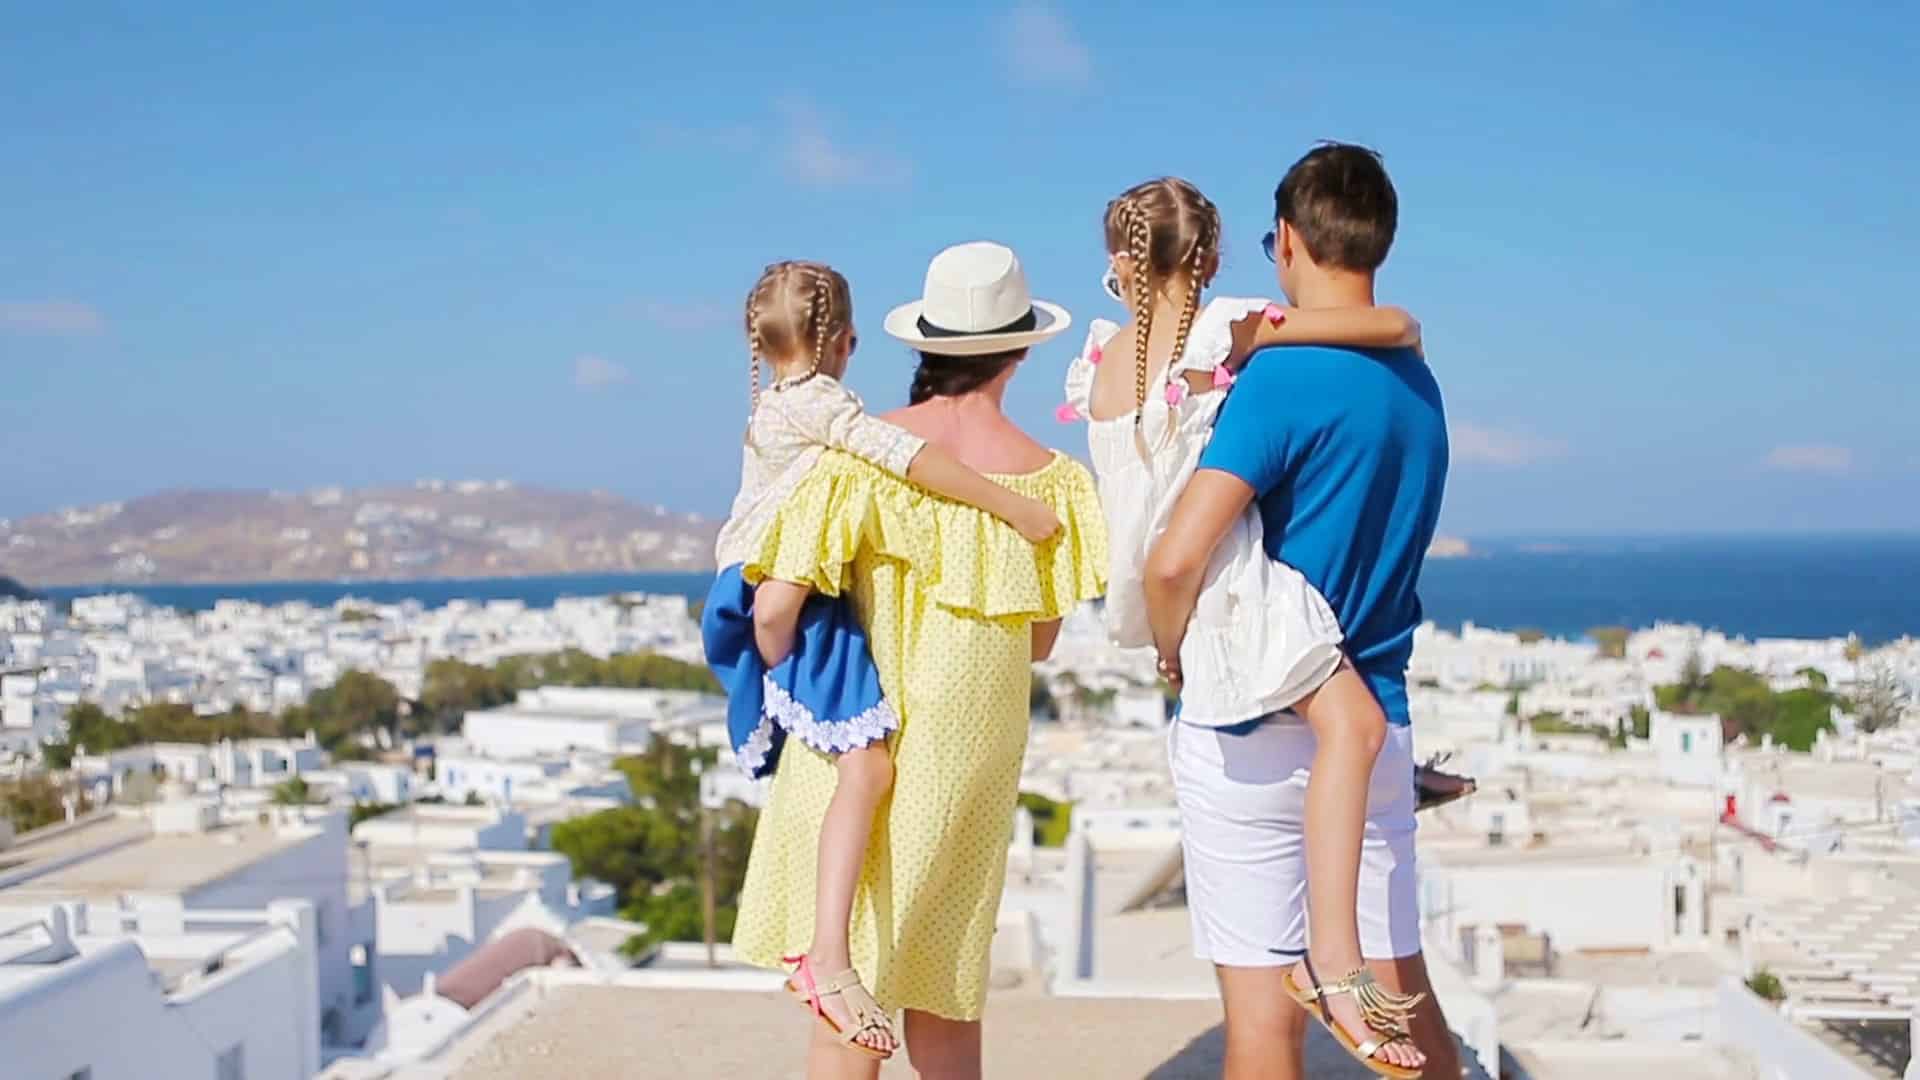 family in europe parents and kids background the old town in mykonos island greece brrvzr7t thumbnail full01